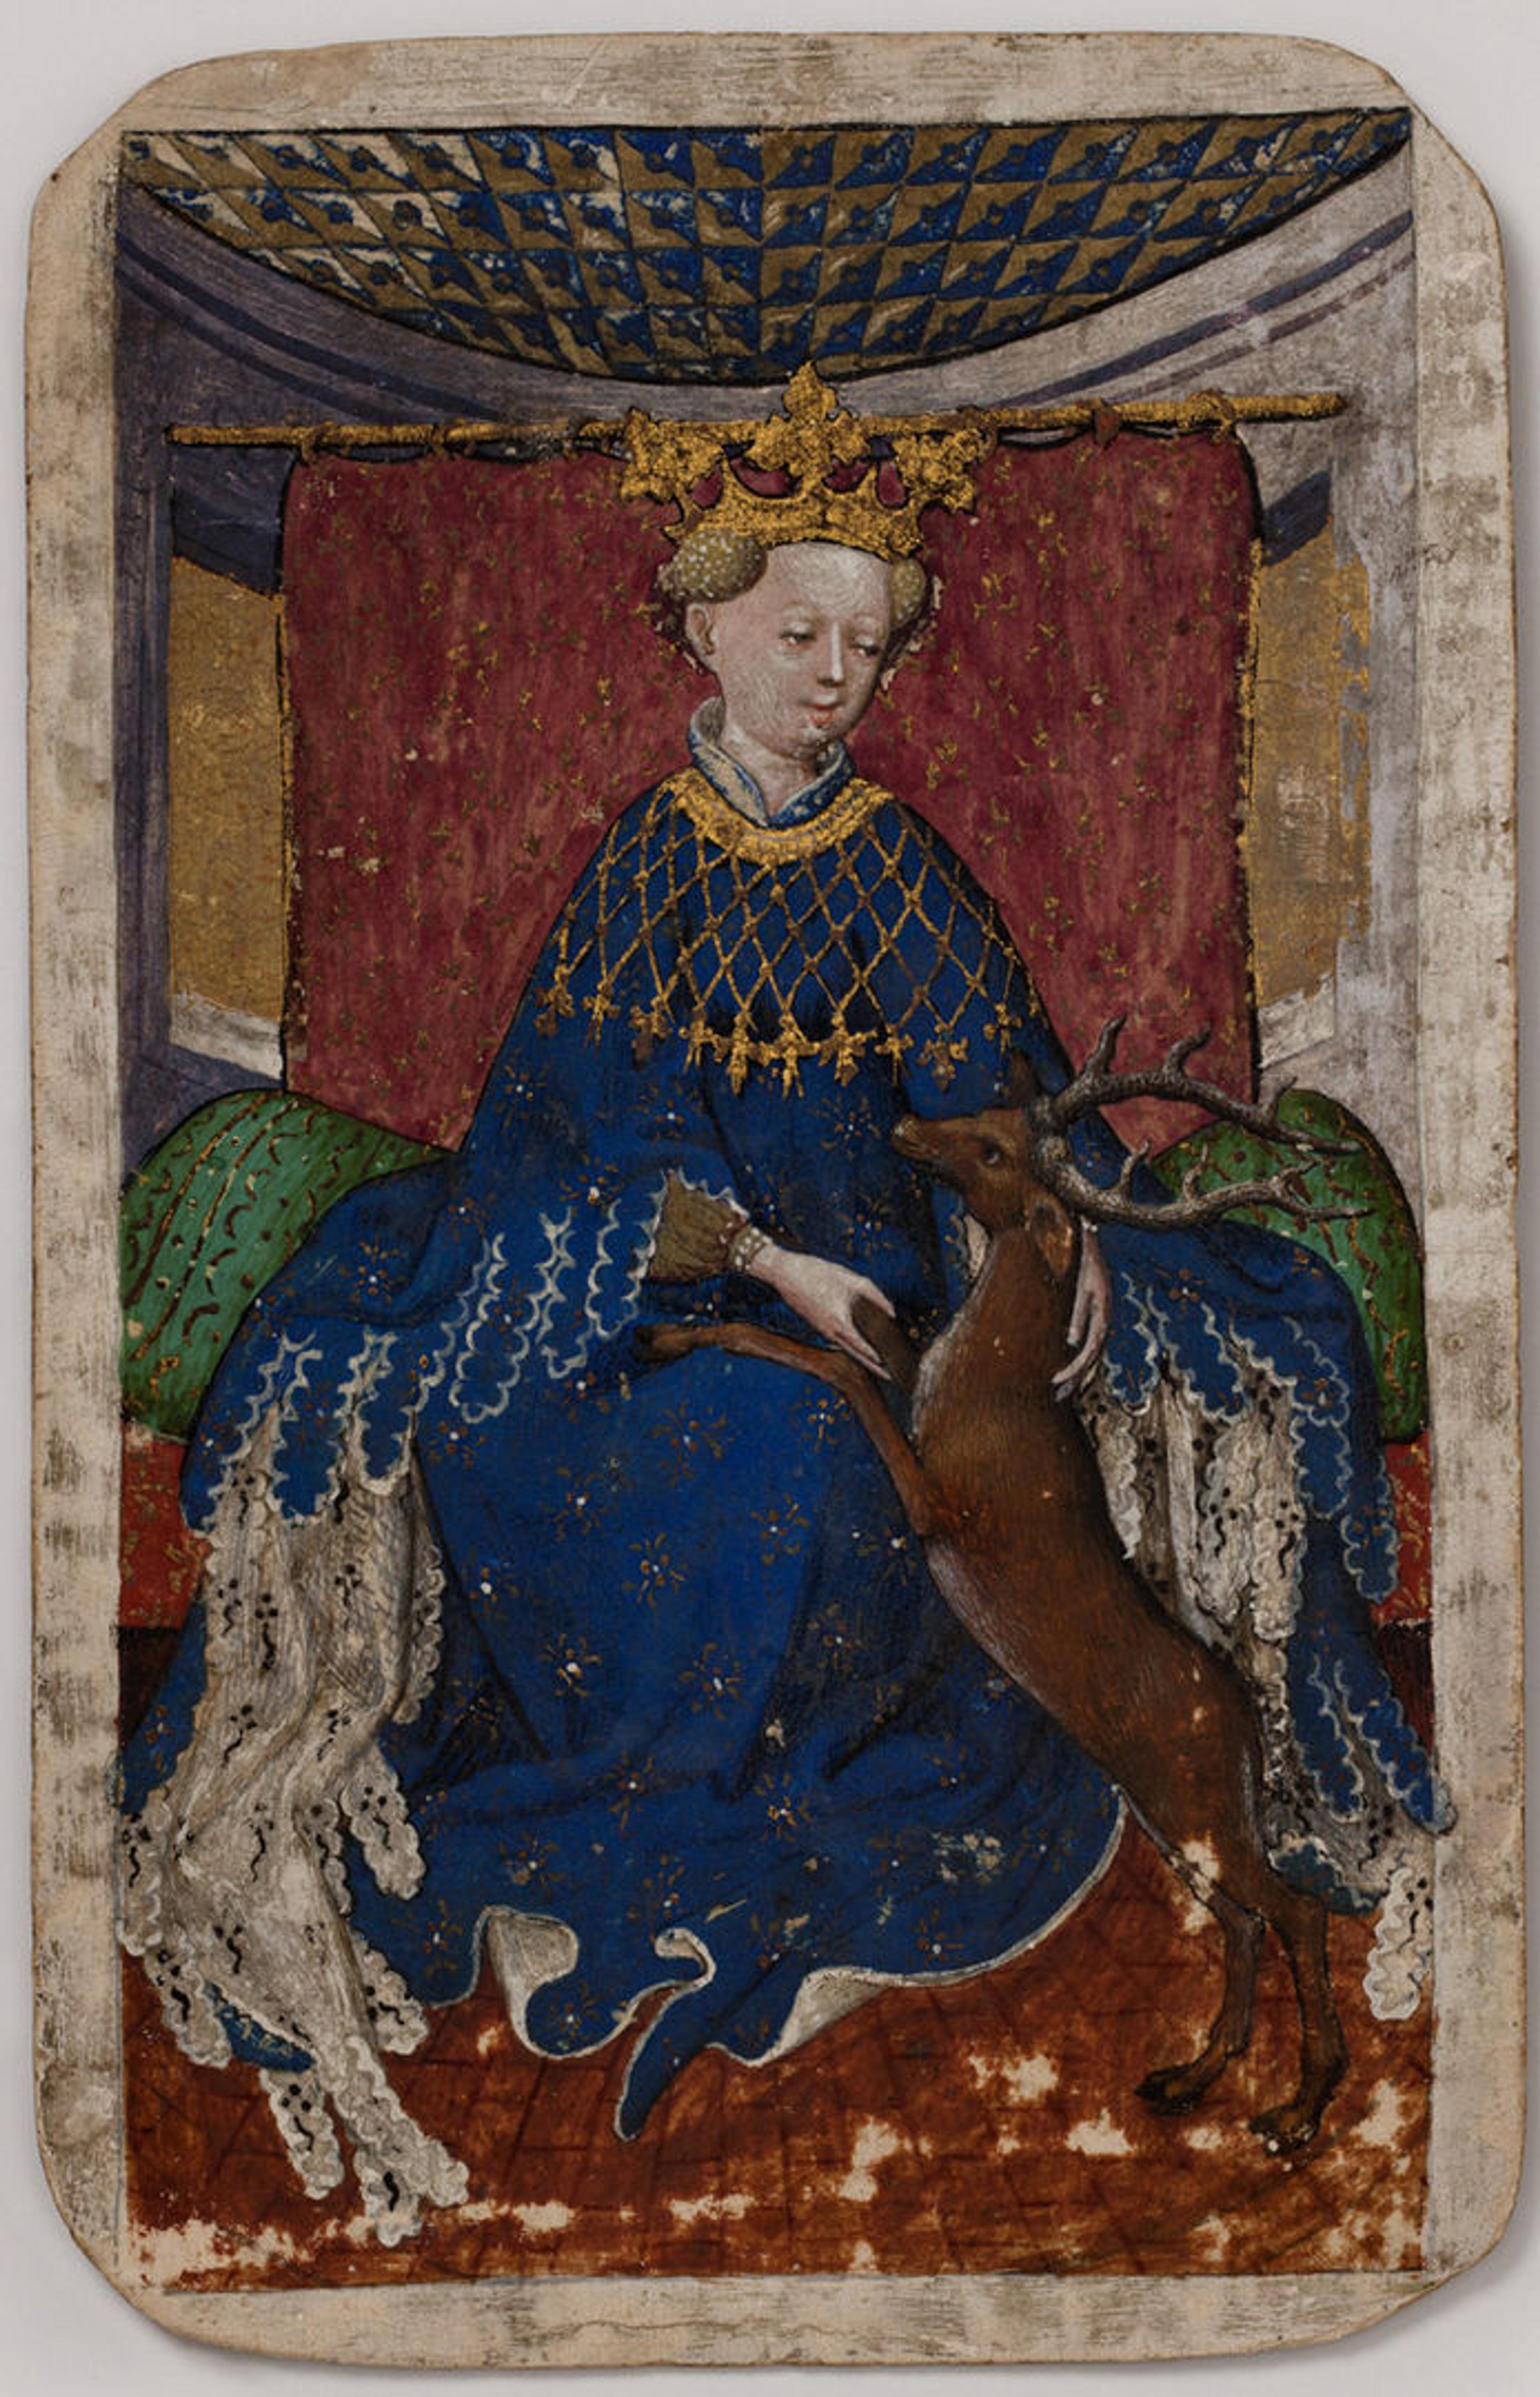 Queen of Stags, from The Stuttgart Playing Cards, ca. 1430. Made in Upper Rhineland, Germany. Paper (six layers in pasteboard) with gold ground and opaque paint over pen and ink; 7 1/2 x 4 3/4 in. (19.1 x 12.1 cm). Landesmuseum Württemberg, Stuttgart (KK grau 15)